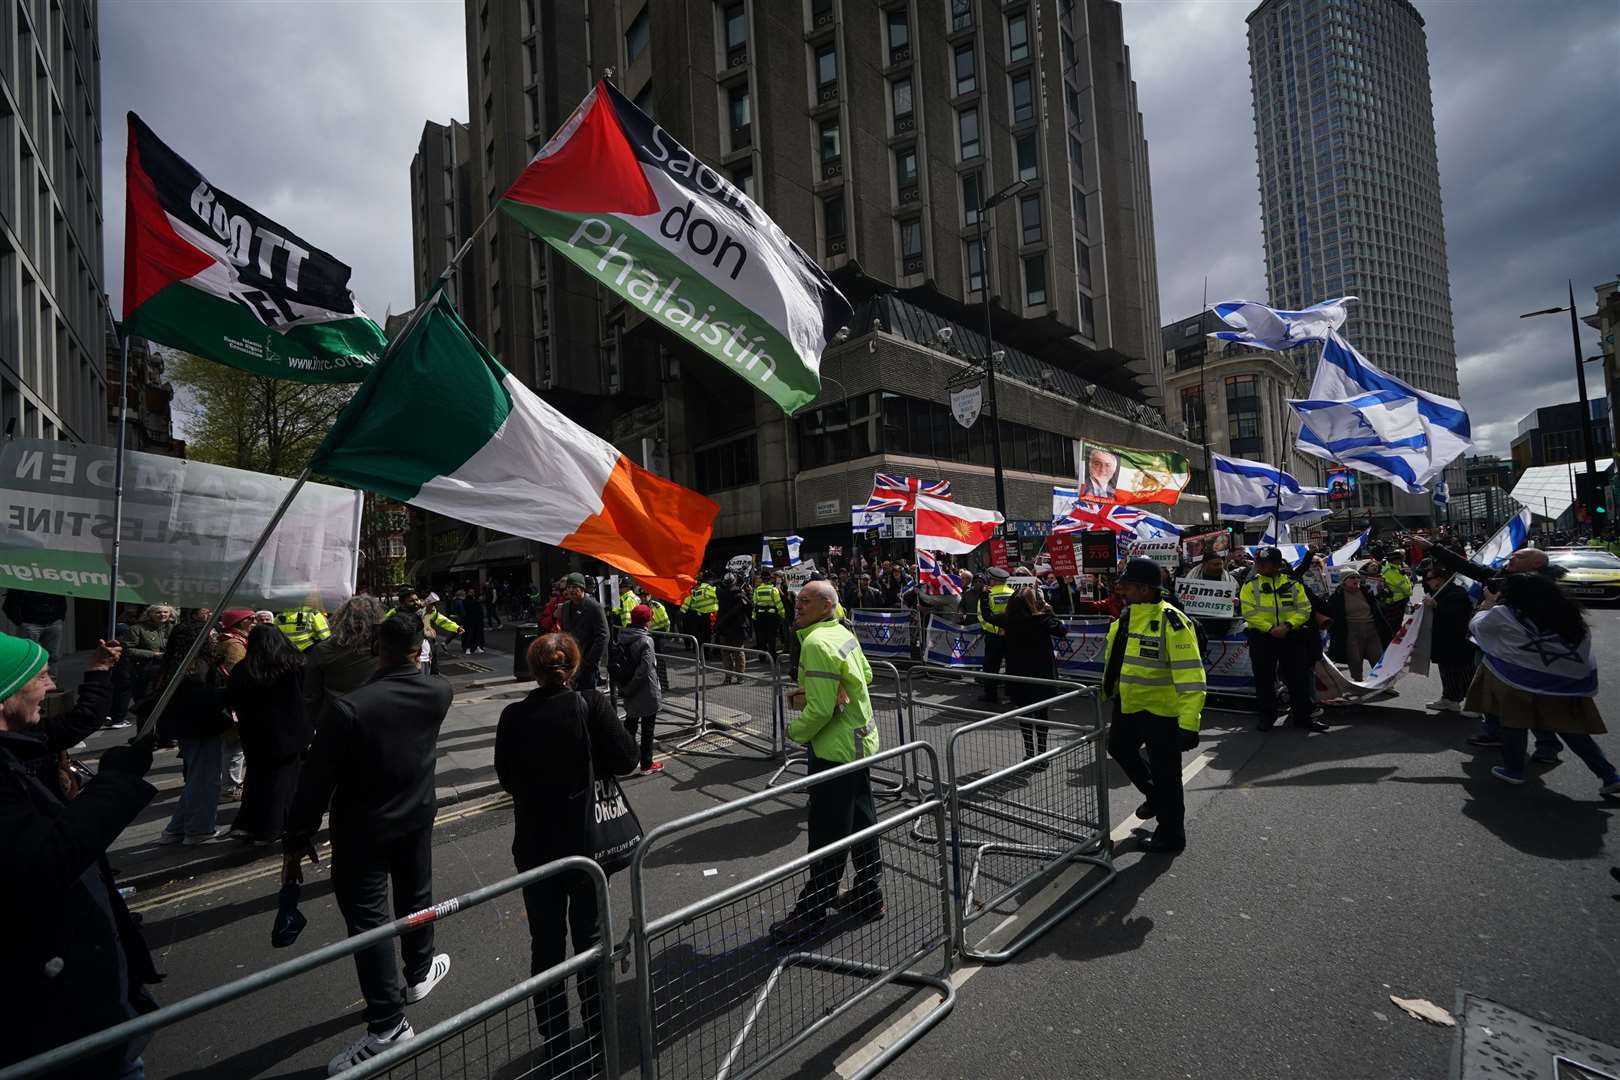 Pro-Israel supporters and pro-Palestine supporters hold opposing demonstrations in Tottenham Court Road, in central London (Yui Mok/PA)